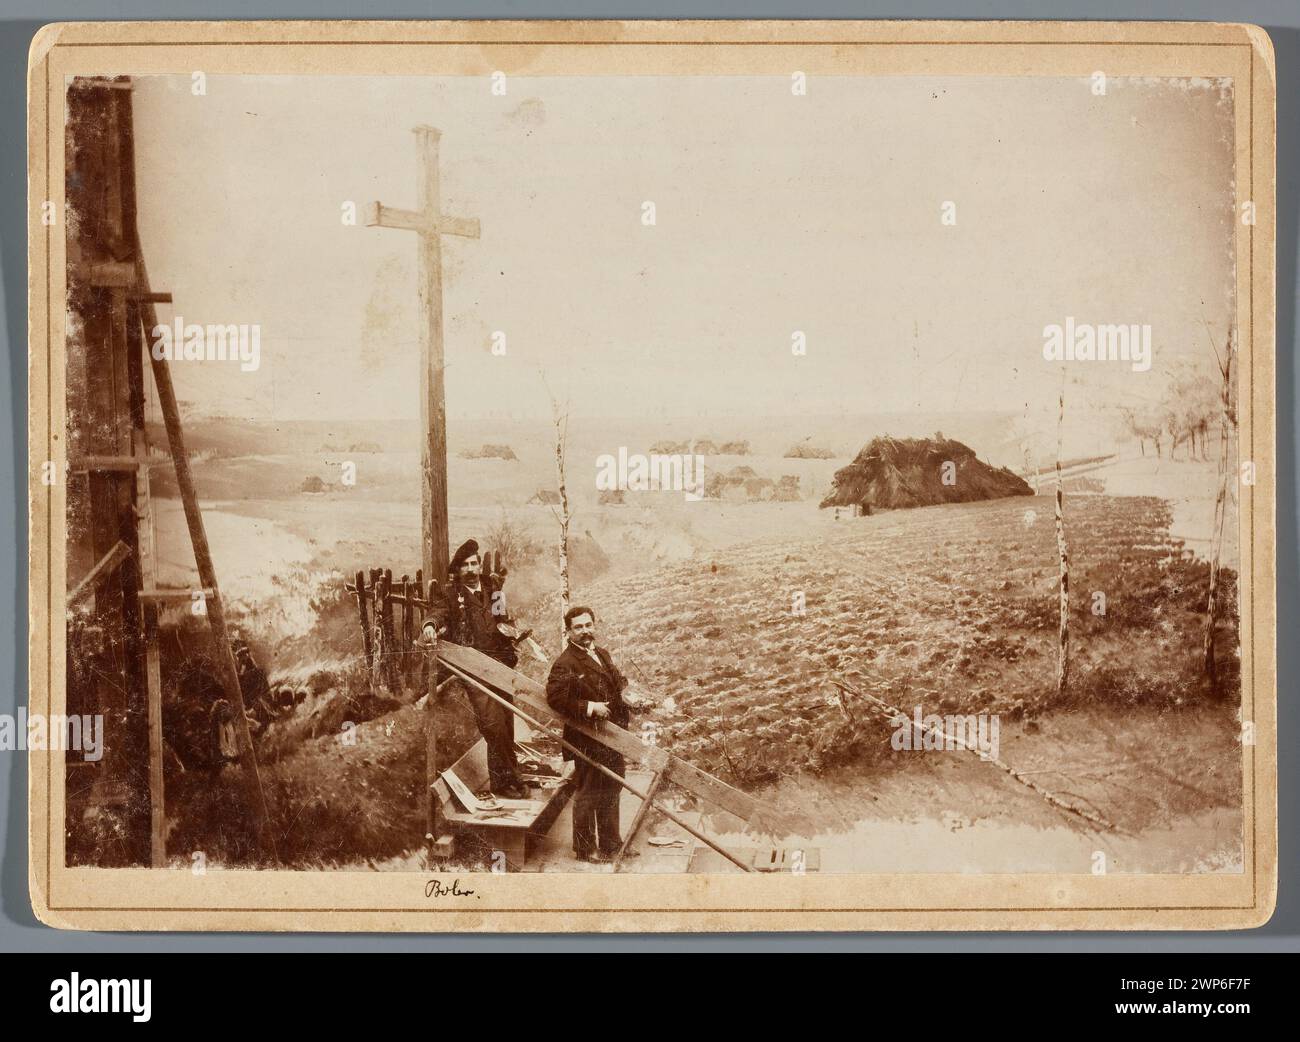 Painting the panorama of Rac Avice: Tadeusz Popiel and Ludwig Boller standing with pallets on the scaffolding at a part of the deposit of the shown of the crossing of the cross at the crossroads of Dziemierzycki; Unknown, Hamel and Feigl (Lviv; Sk Ad photographic materials; 1892-Ca 1905); 1893/1894 (1893-00-00-1894-00-00);Boller, Ludwig (1862-1896), Boller, Ludwig (1862-1896) - iconography, Boller, Ludwig (1862-1896) - reproduction, Hamel and Feigl (Lviv - composition of photographic materials - 1892 -Ca 1905), Kossak, Wojciech (1856-1942), Kossak, Wojciech (1856-1942)-reproduction, Lviv (Ukra Stock Photo